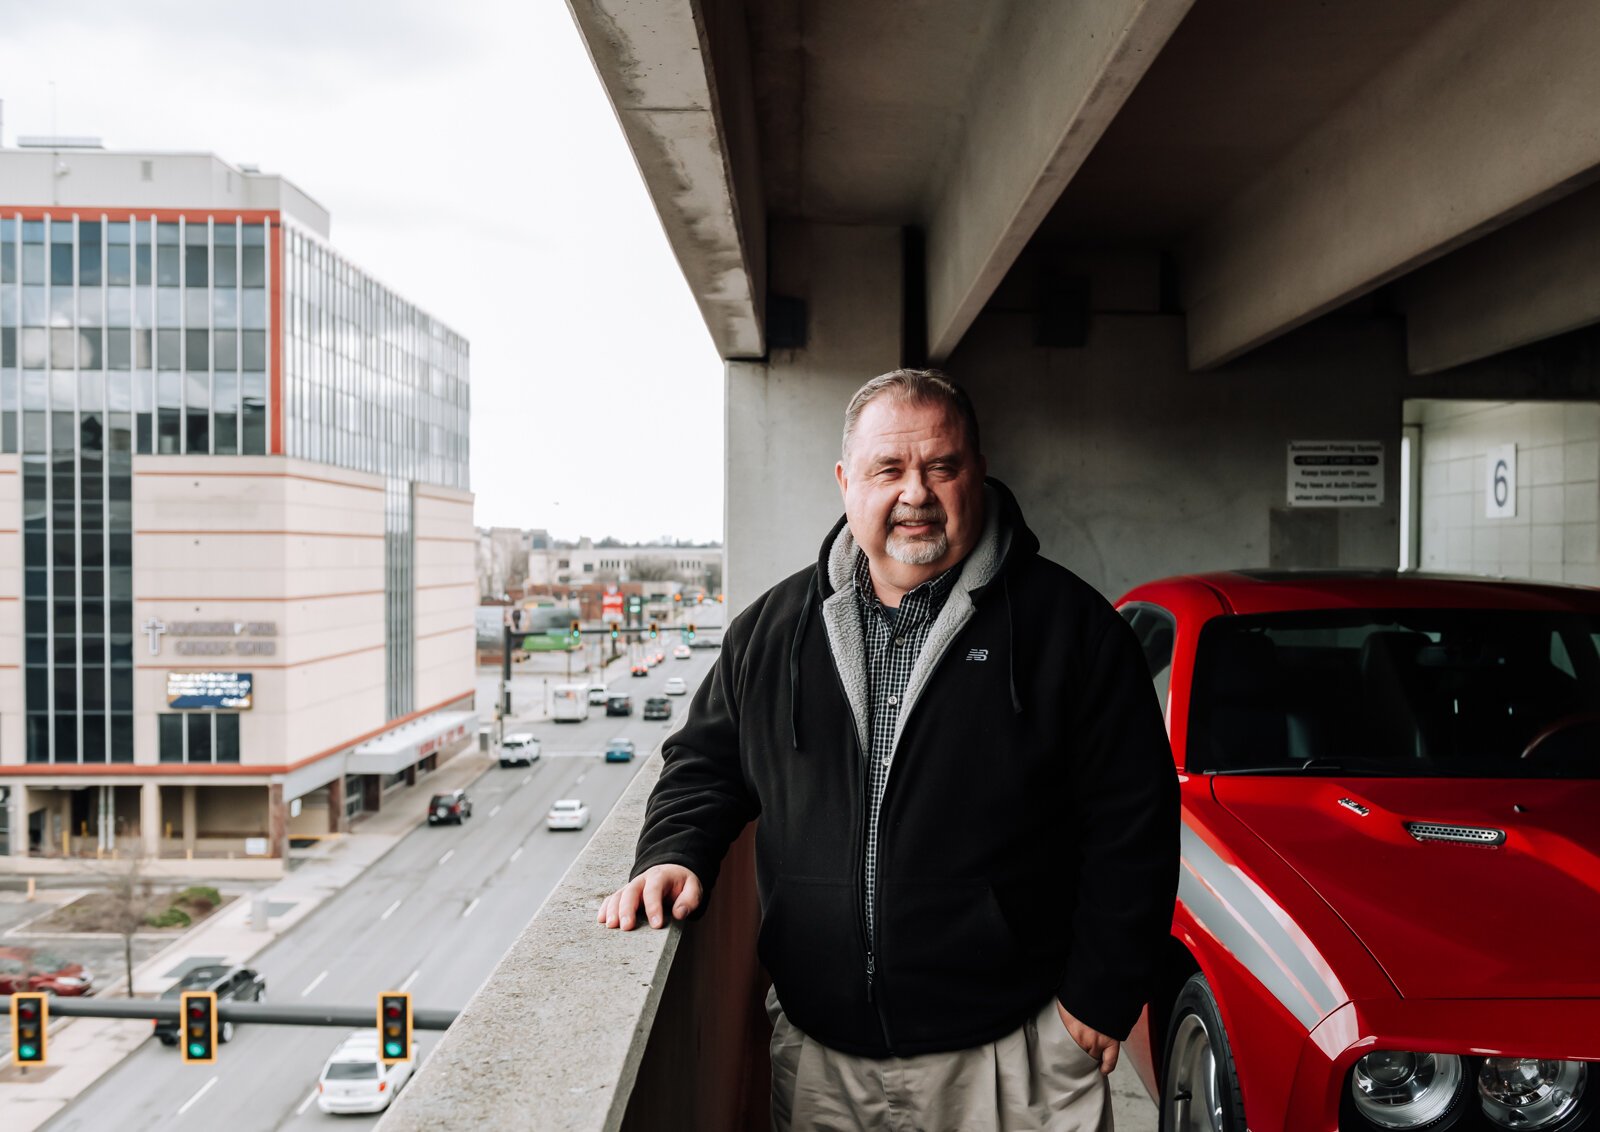 The City of Fort Wayne’s Historic Preservation Planner Creager Smith on top of the Town Center parking garage at the corner of Clinton and E. Wayne St.